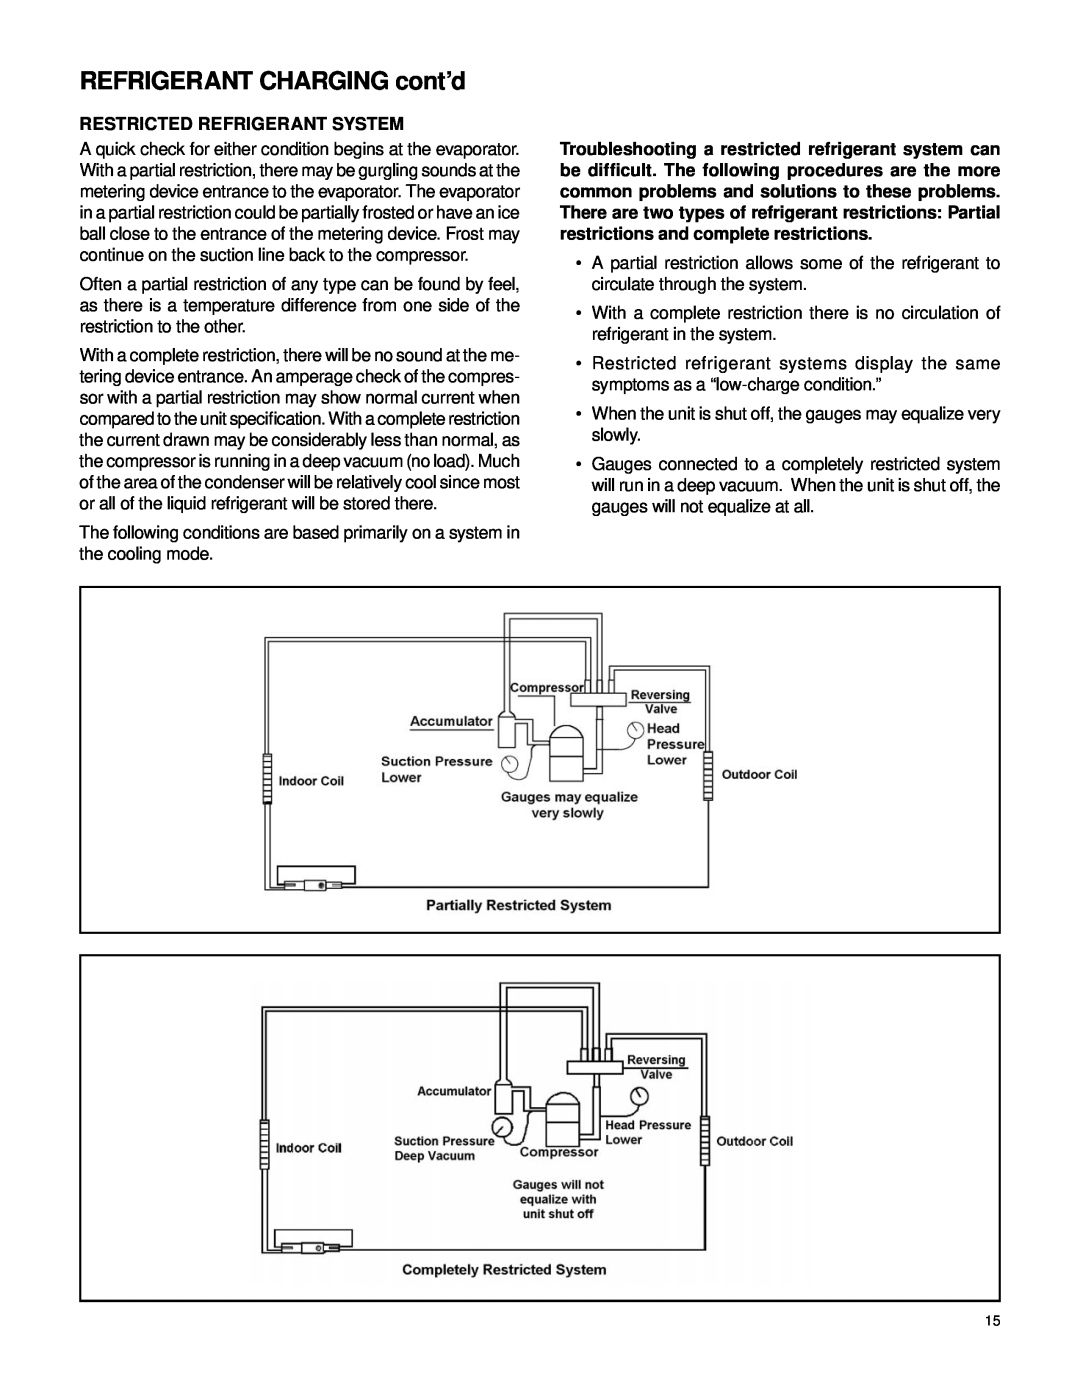 Friedrich 2007 service manual REFRIGERANT CHARGING cont’d, Restricted Refrigerant System 